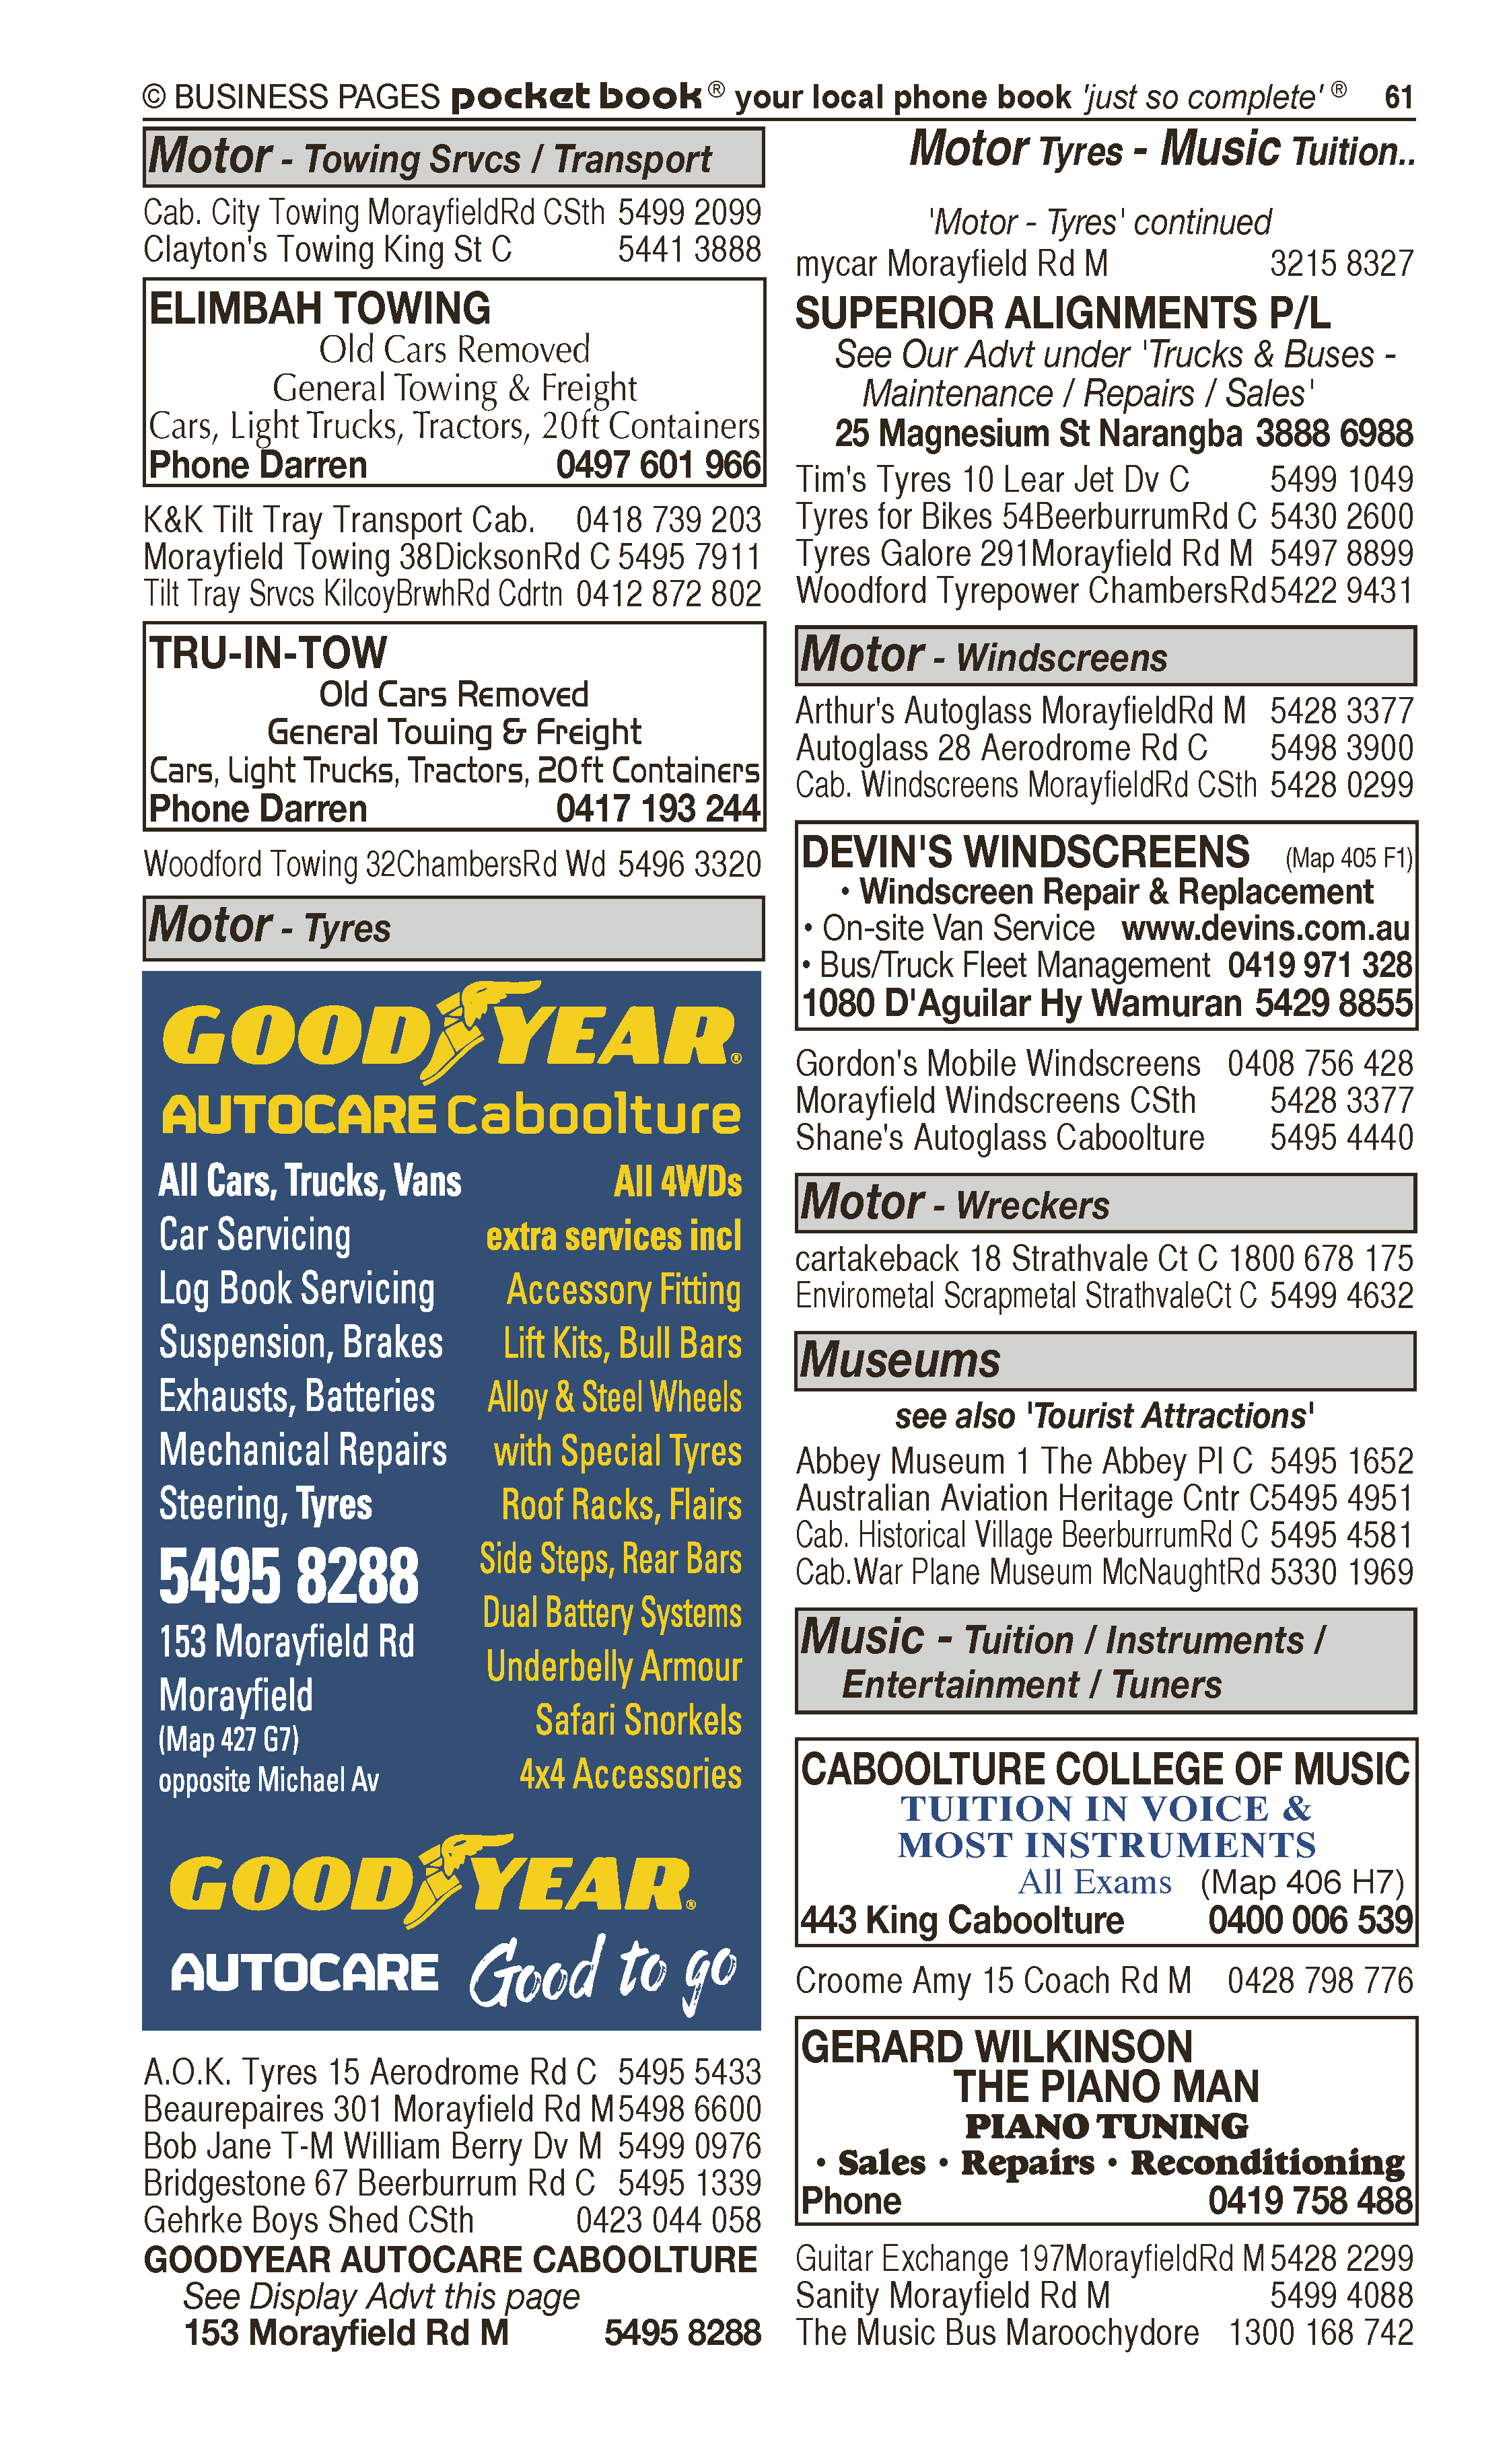 Goodyear Autocare Caboolture | Motor – Tyres in Morayfield | PBezy Pocket Books local directories - page 61